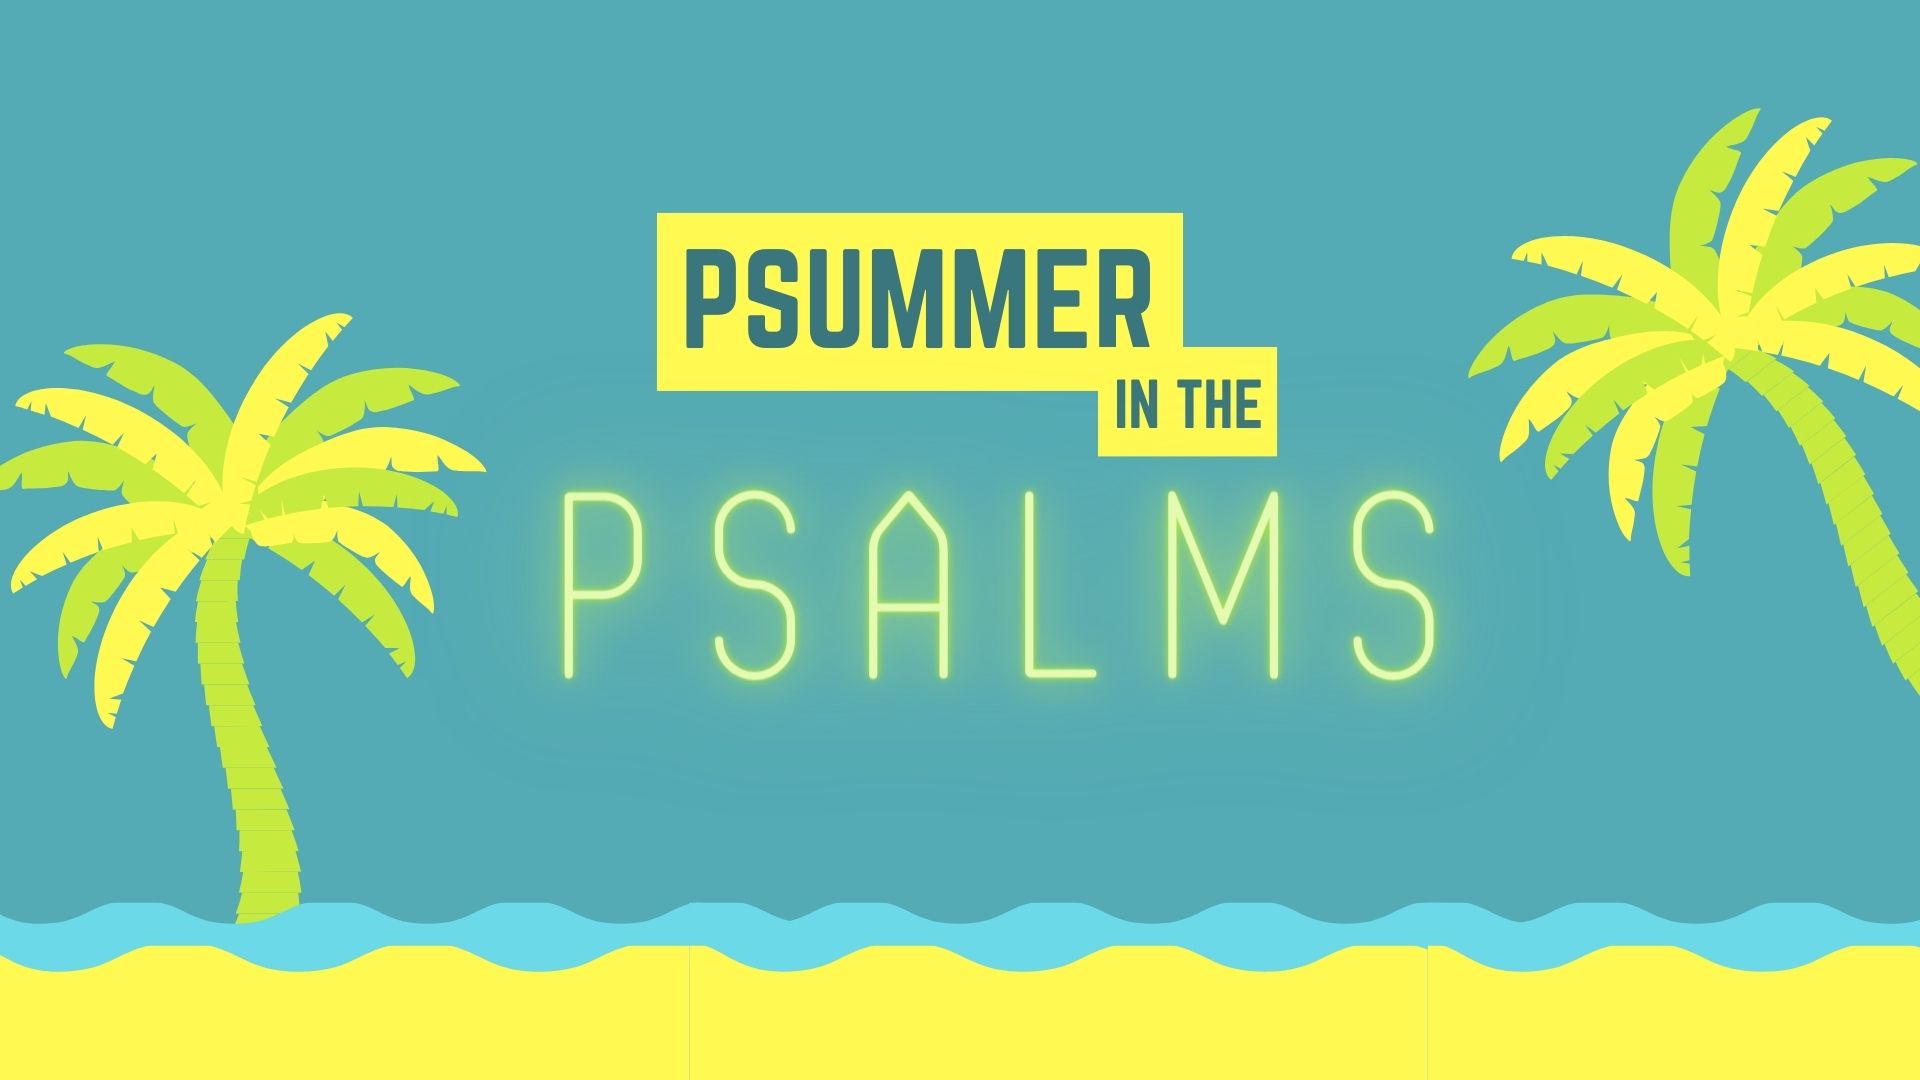 Psummer in the Psalms - Psalm 32